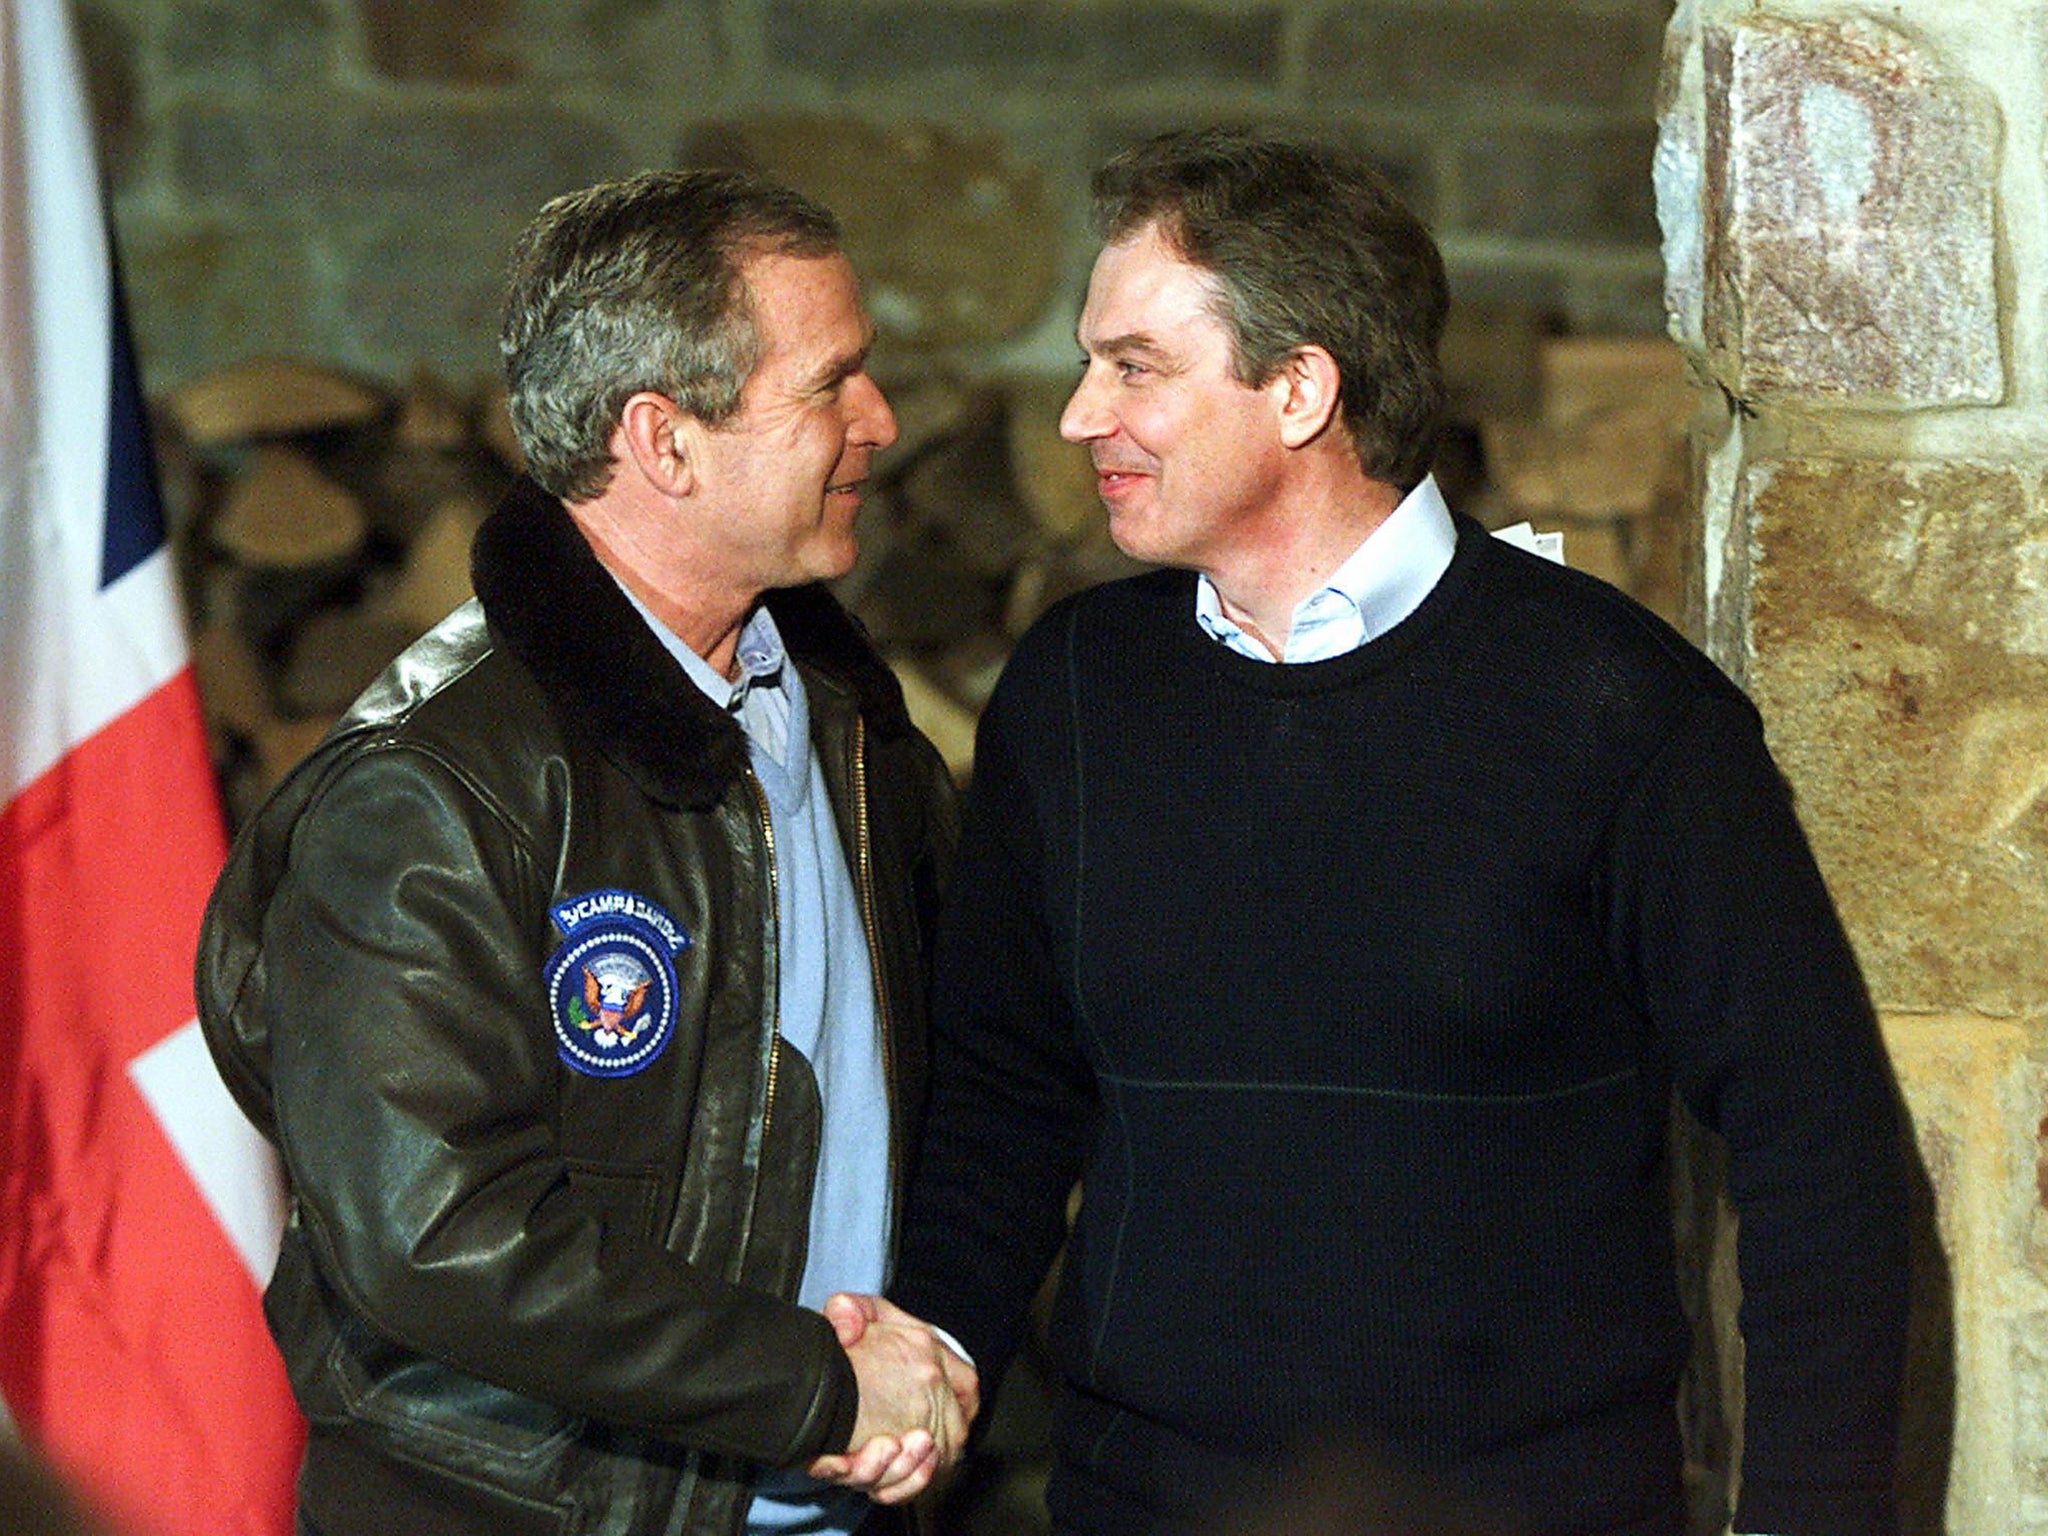 Tony Blair told George W Bush he was with him "whatever" – but what if he hadn't?